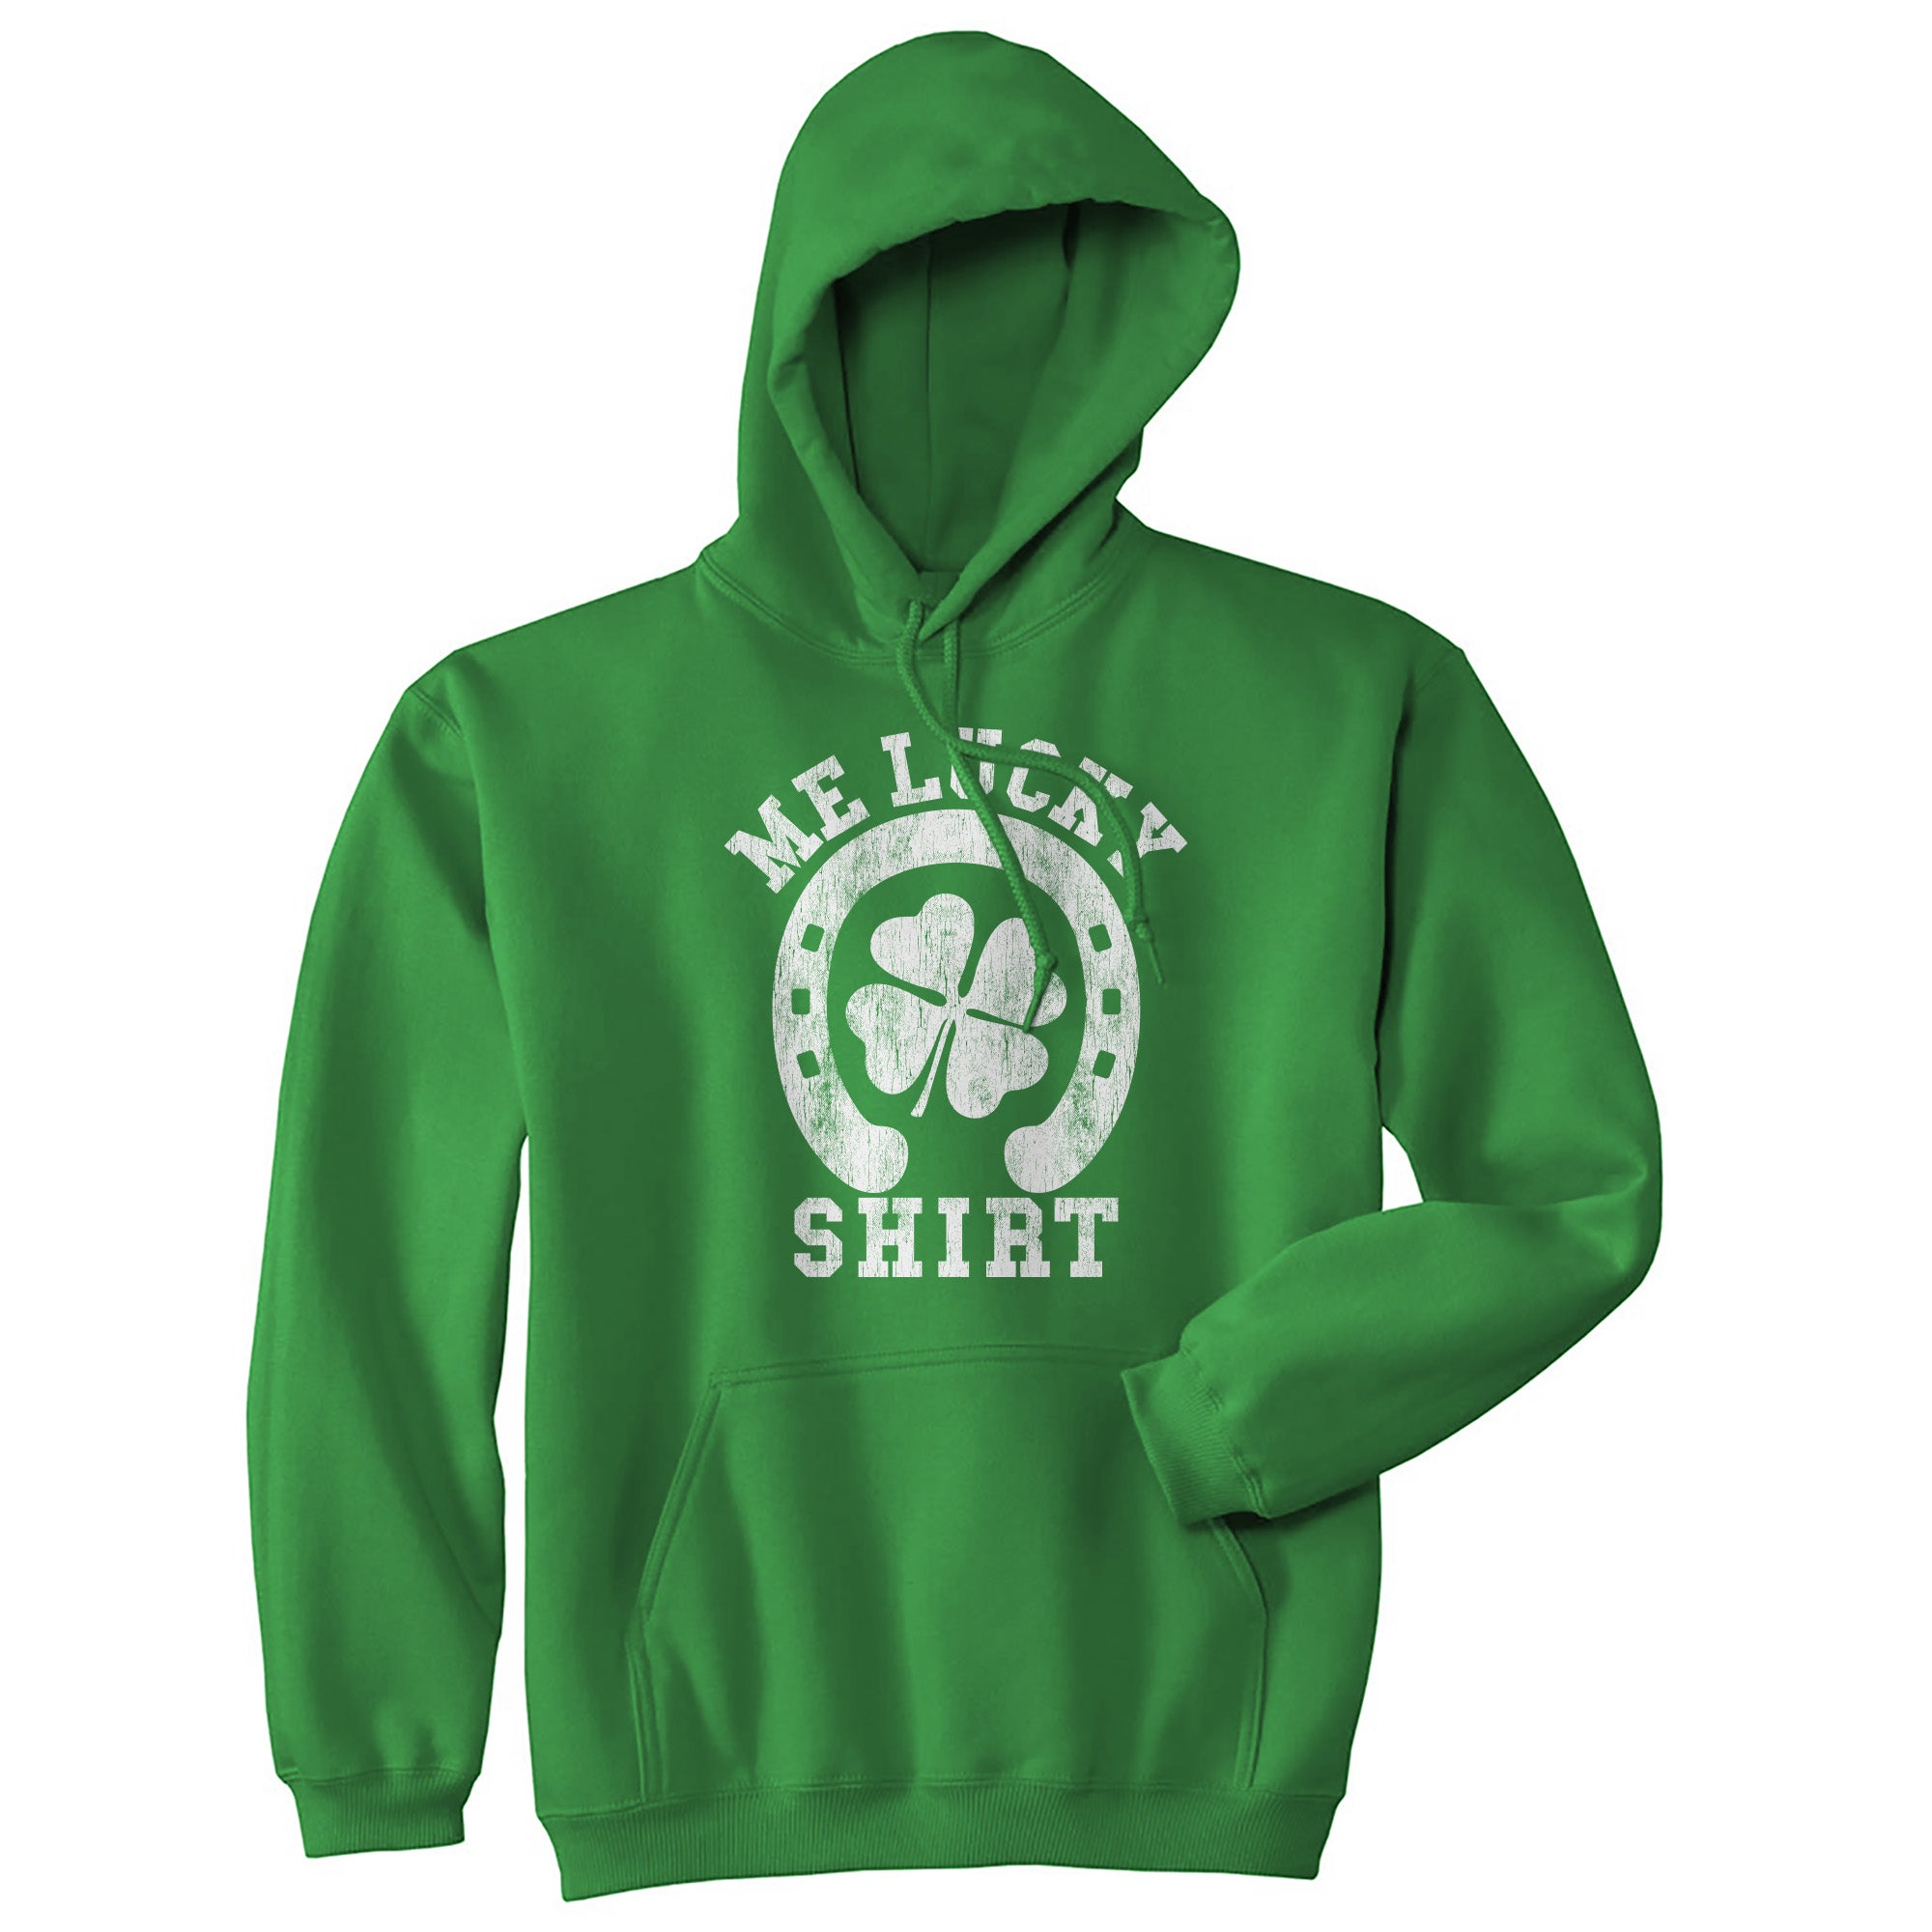 Funny Green Me Lucky Shirt Hoodie Nerdy Saint Patrick's Day Sarcastic Tee